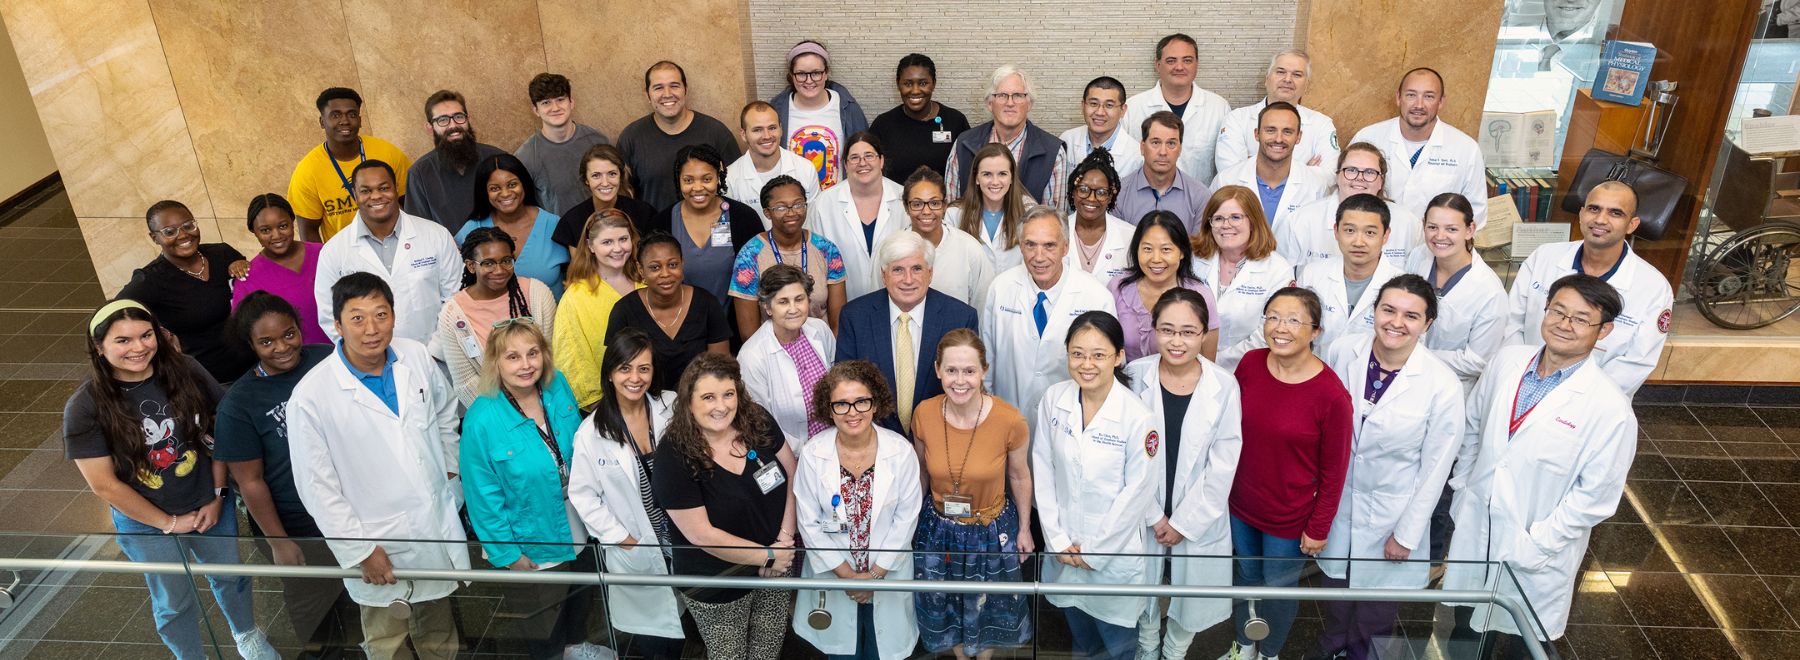 Group photo of physicians in white coats